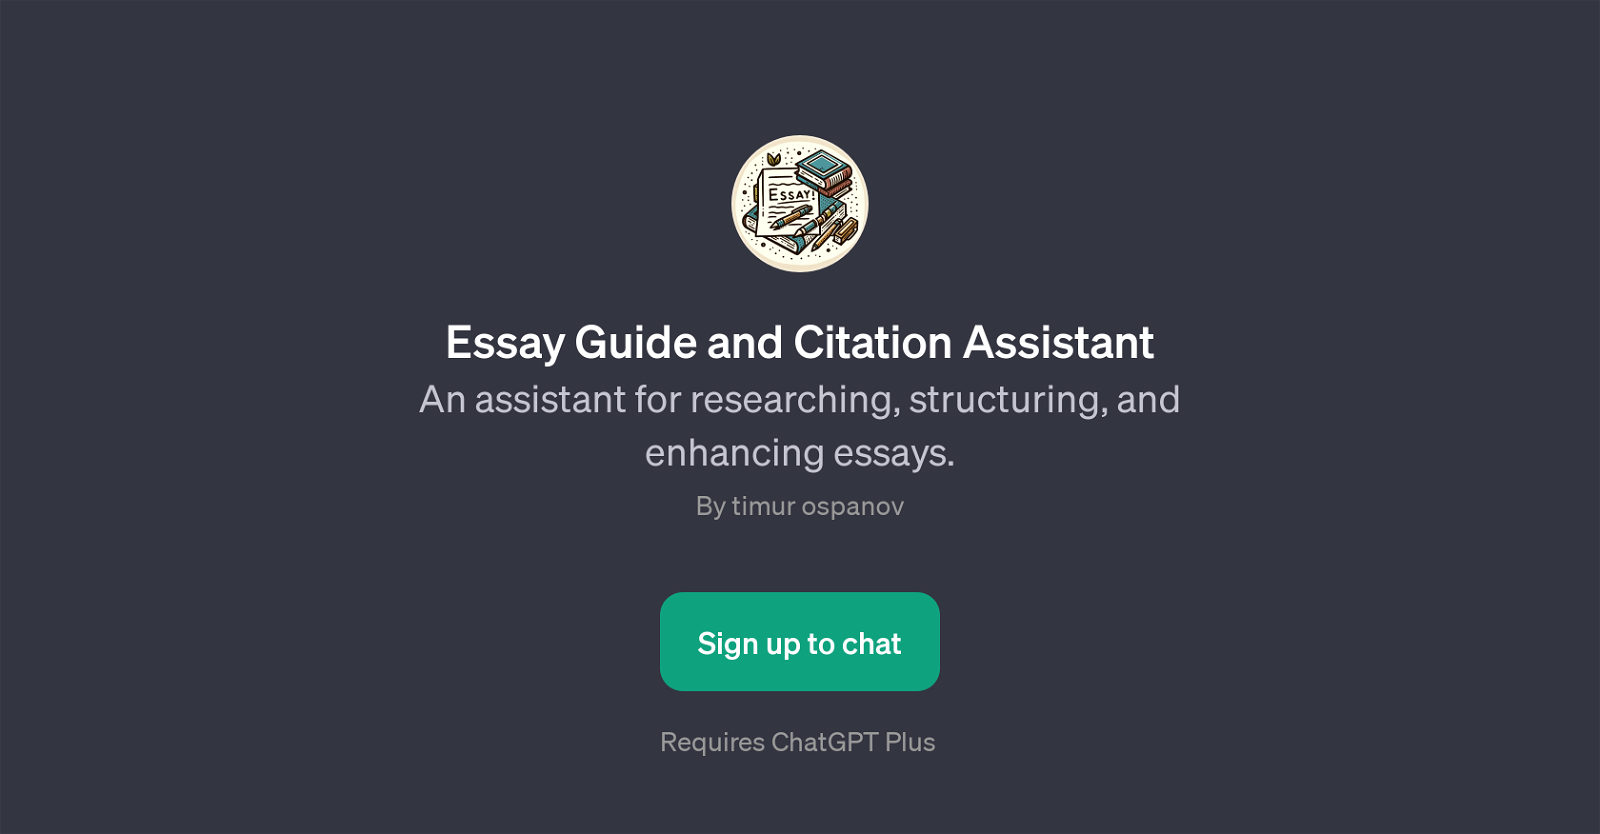 Essay Guide and Citation Assistant website